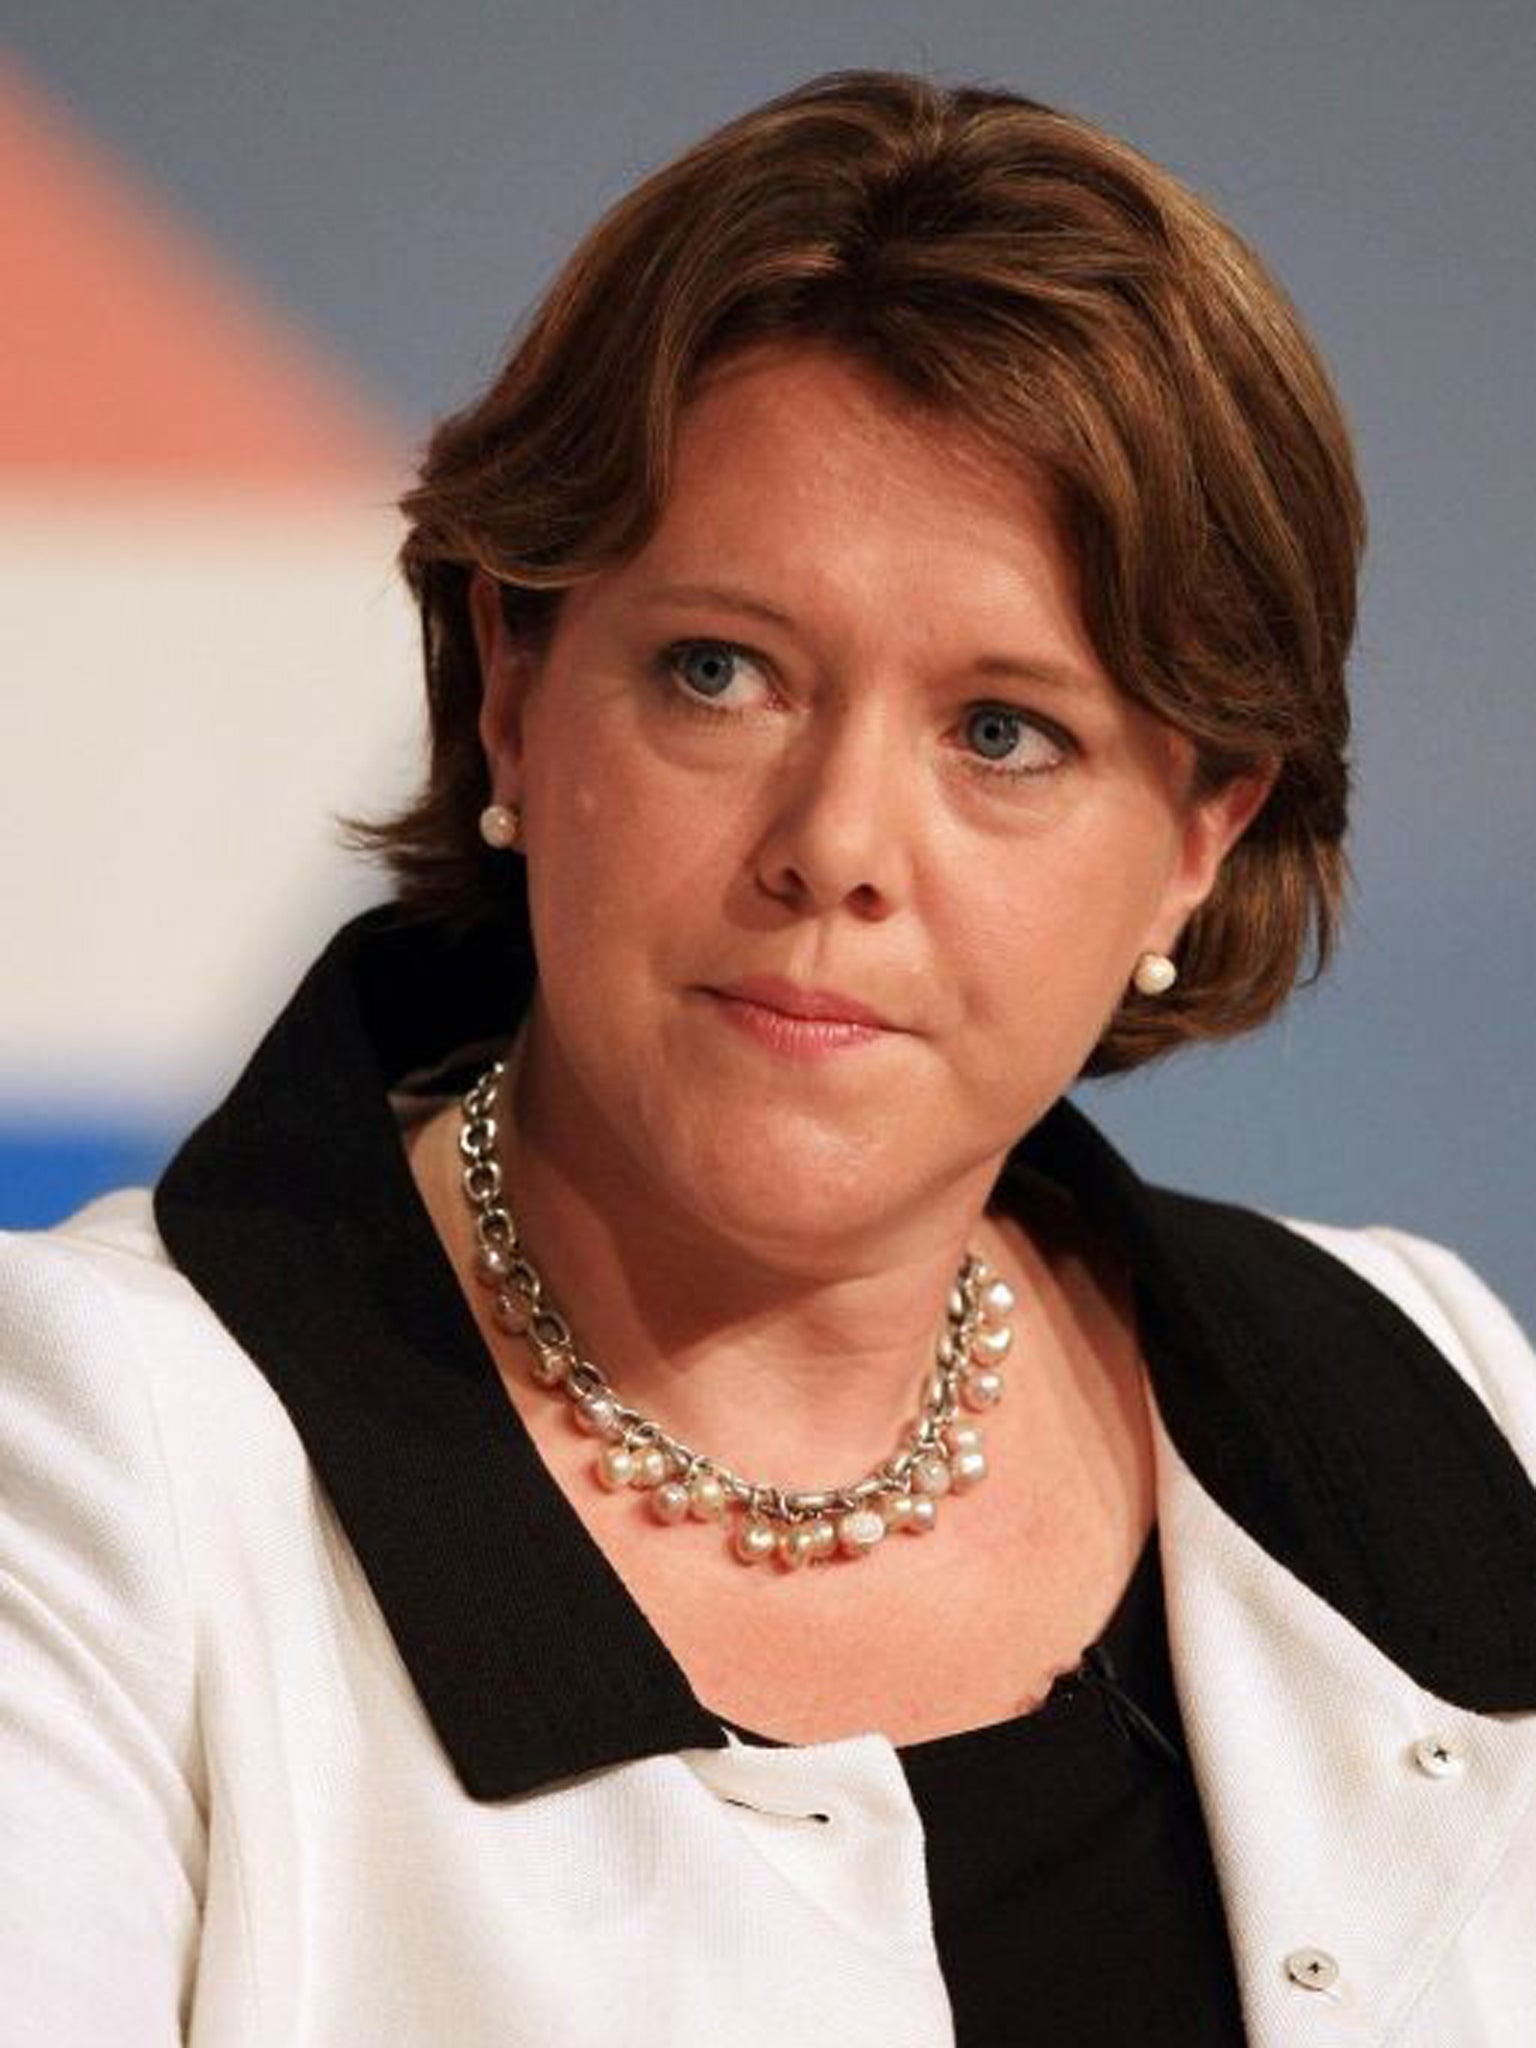 Maria Miller apologised in the Commons in a 79-word statement lasting just over half a minute on Thursday